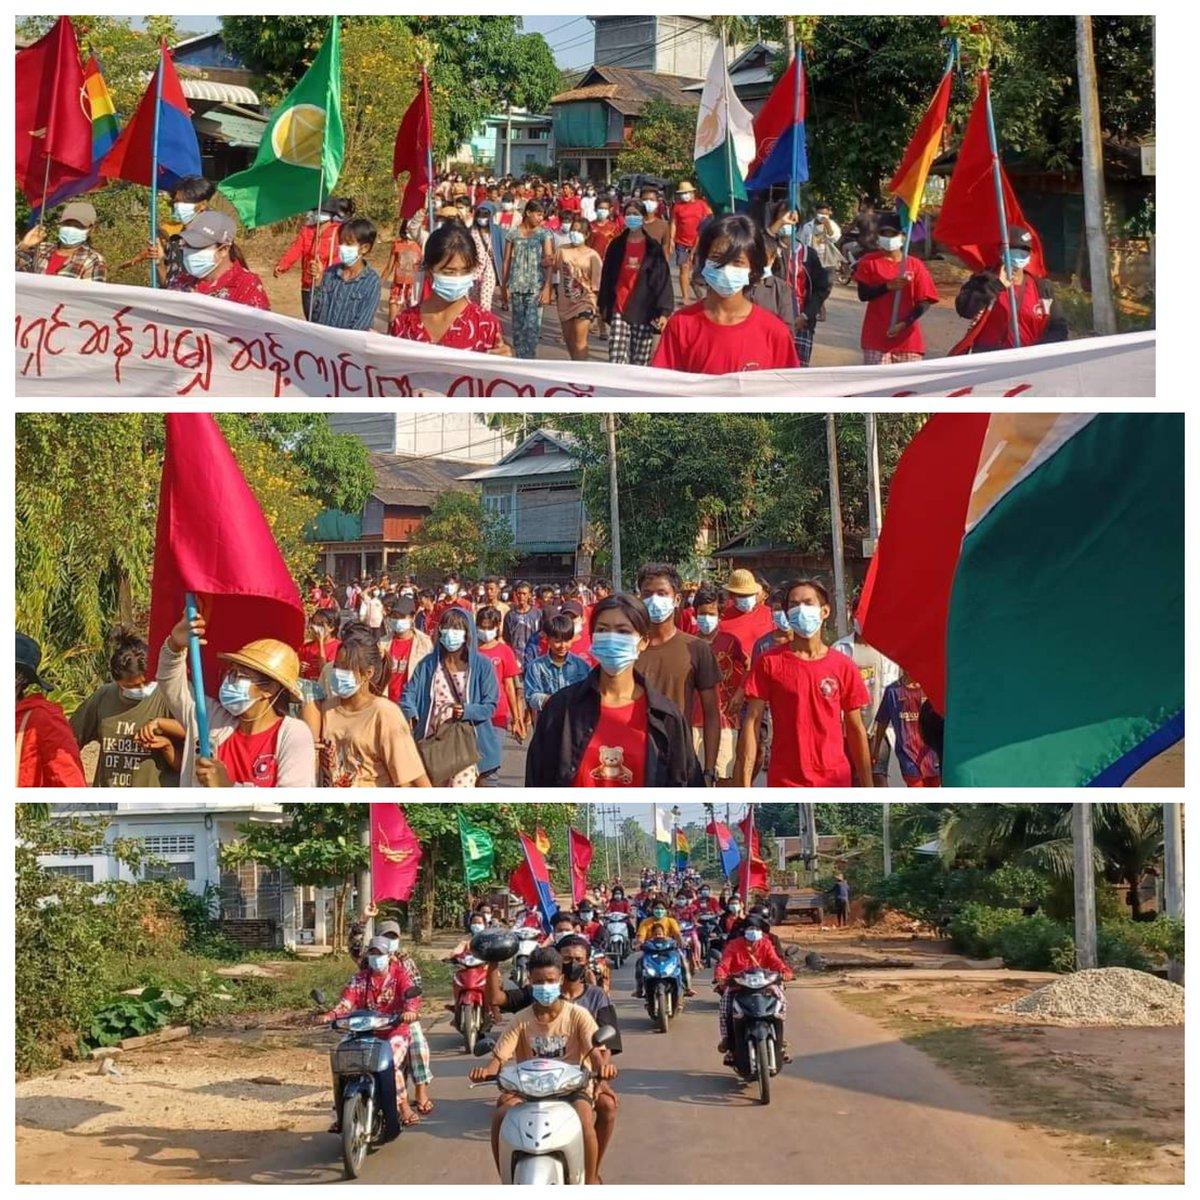 In Long Lon Tsp, the revolutionary youths led by the Dawei District Democracy Movement Strike Committee held a march to eradicate the terrorist military dictatorship.
@UN @ASEAN @EUCouncil
@POTUS
#BanJetFuelExportsToMM
#2024May3Coup
#WhatsHappeningInMyanmar